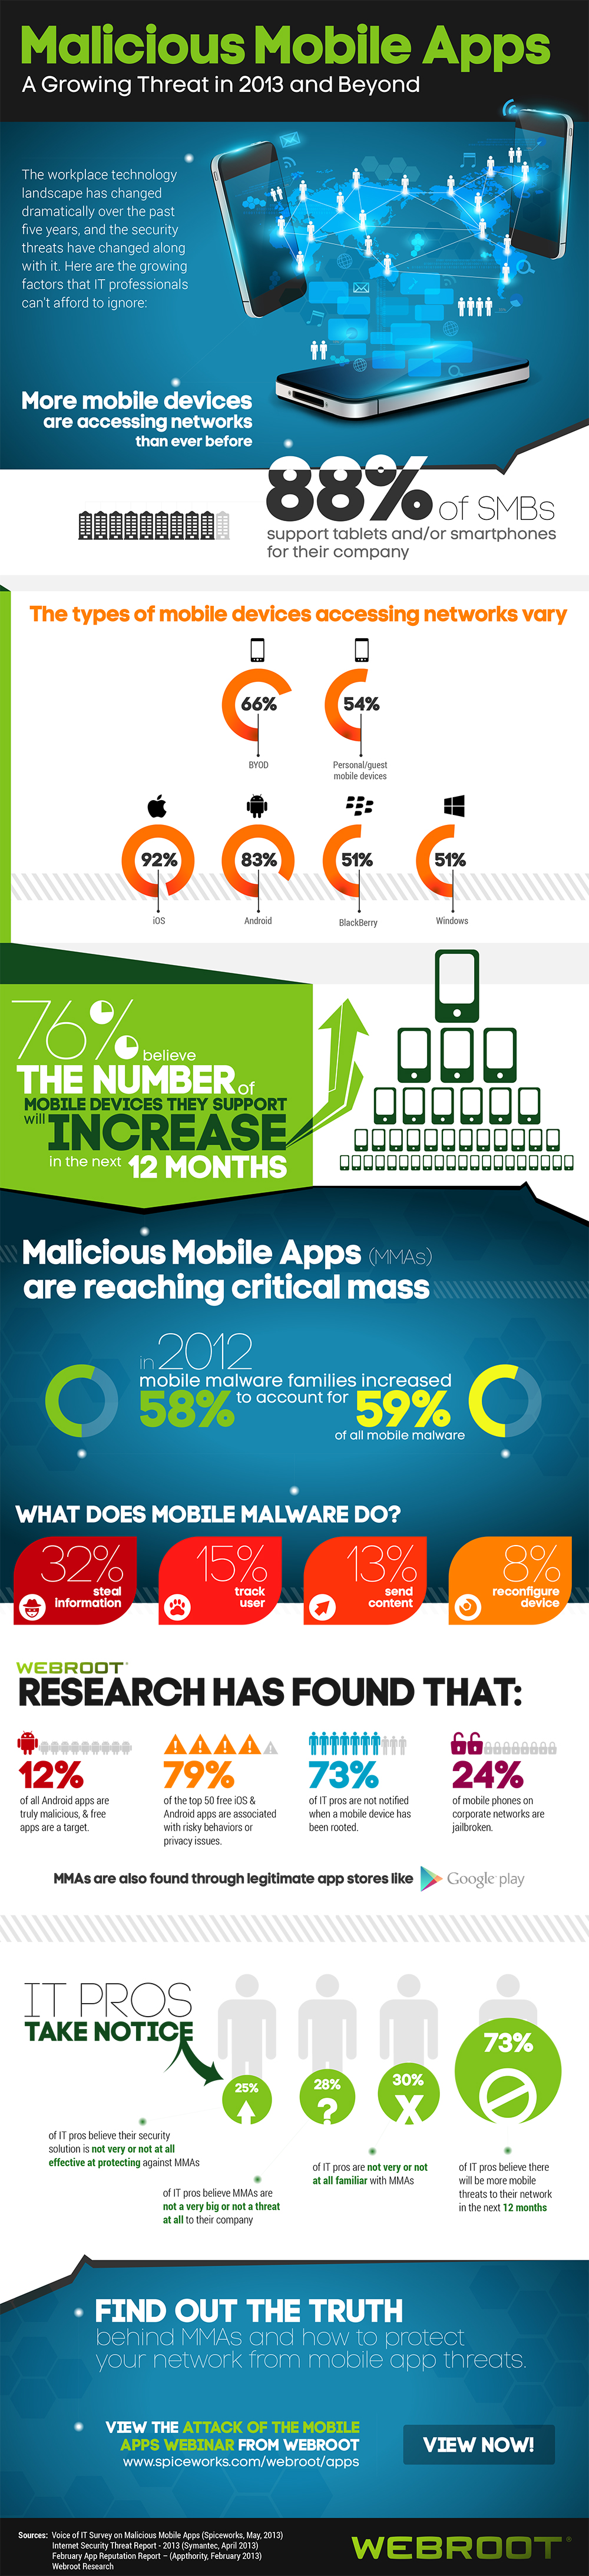 malicious-mobile-apps-2